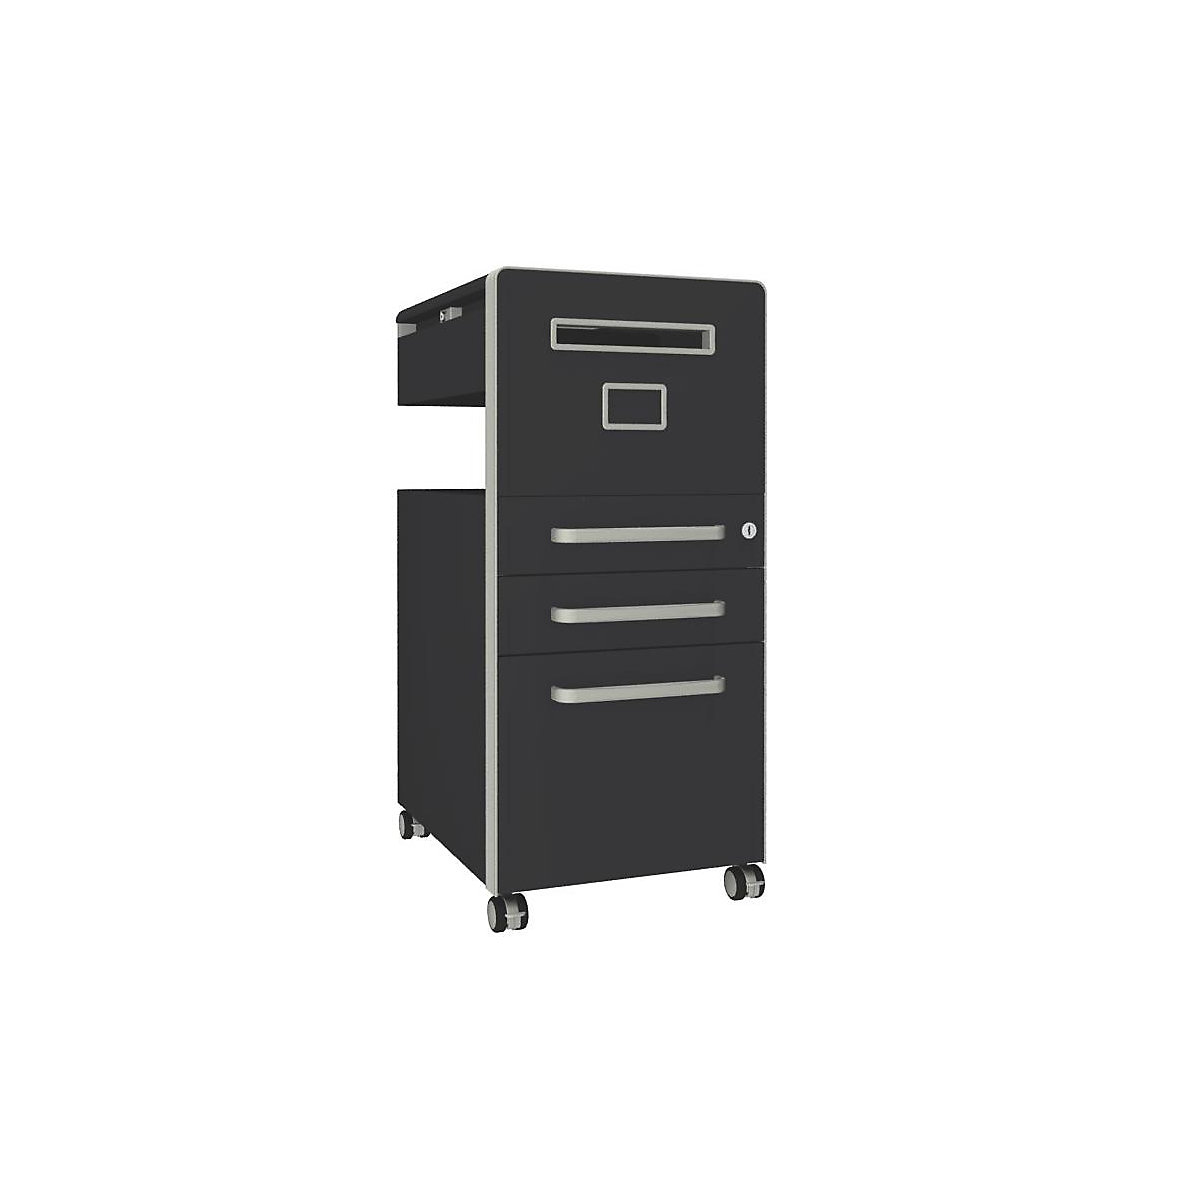 Bite™ pedestal furniture, with 1 whiteboard, opens on the right side – BISLEY, with 2 universal drawers, 1 suspension file drawer, charcoal-11